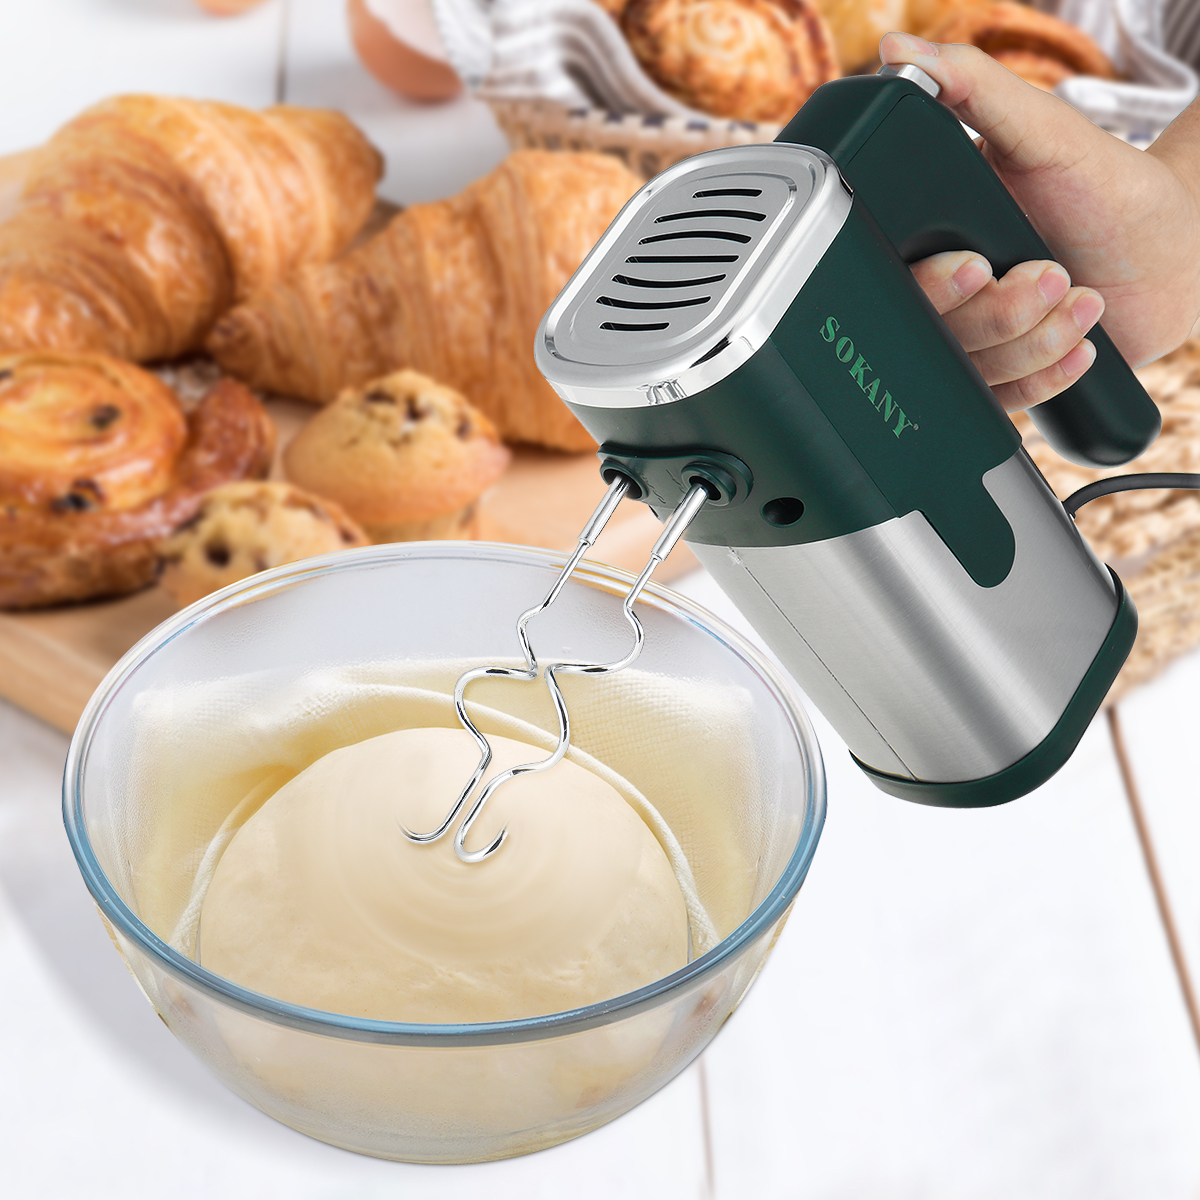 Mini 800W Food Mixer Electric Cuisine Kitchen Blender With Dough Hooks Chrome Egg Beater Sweets Bakery Hand Mixer Machine